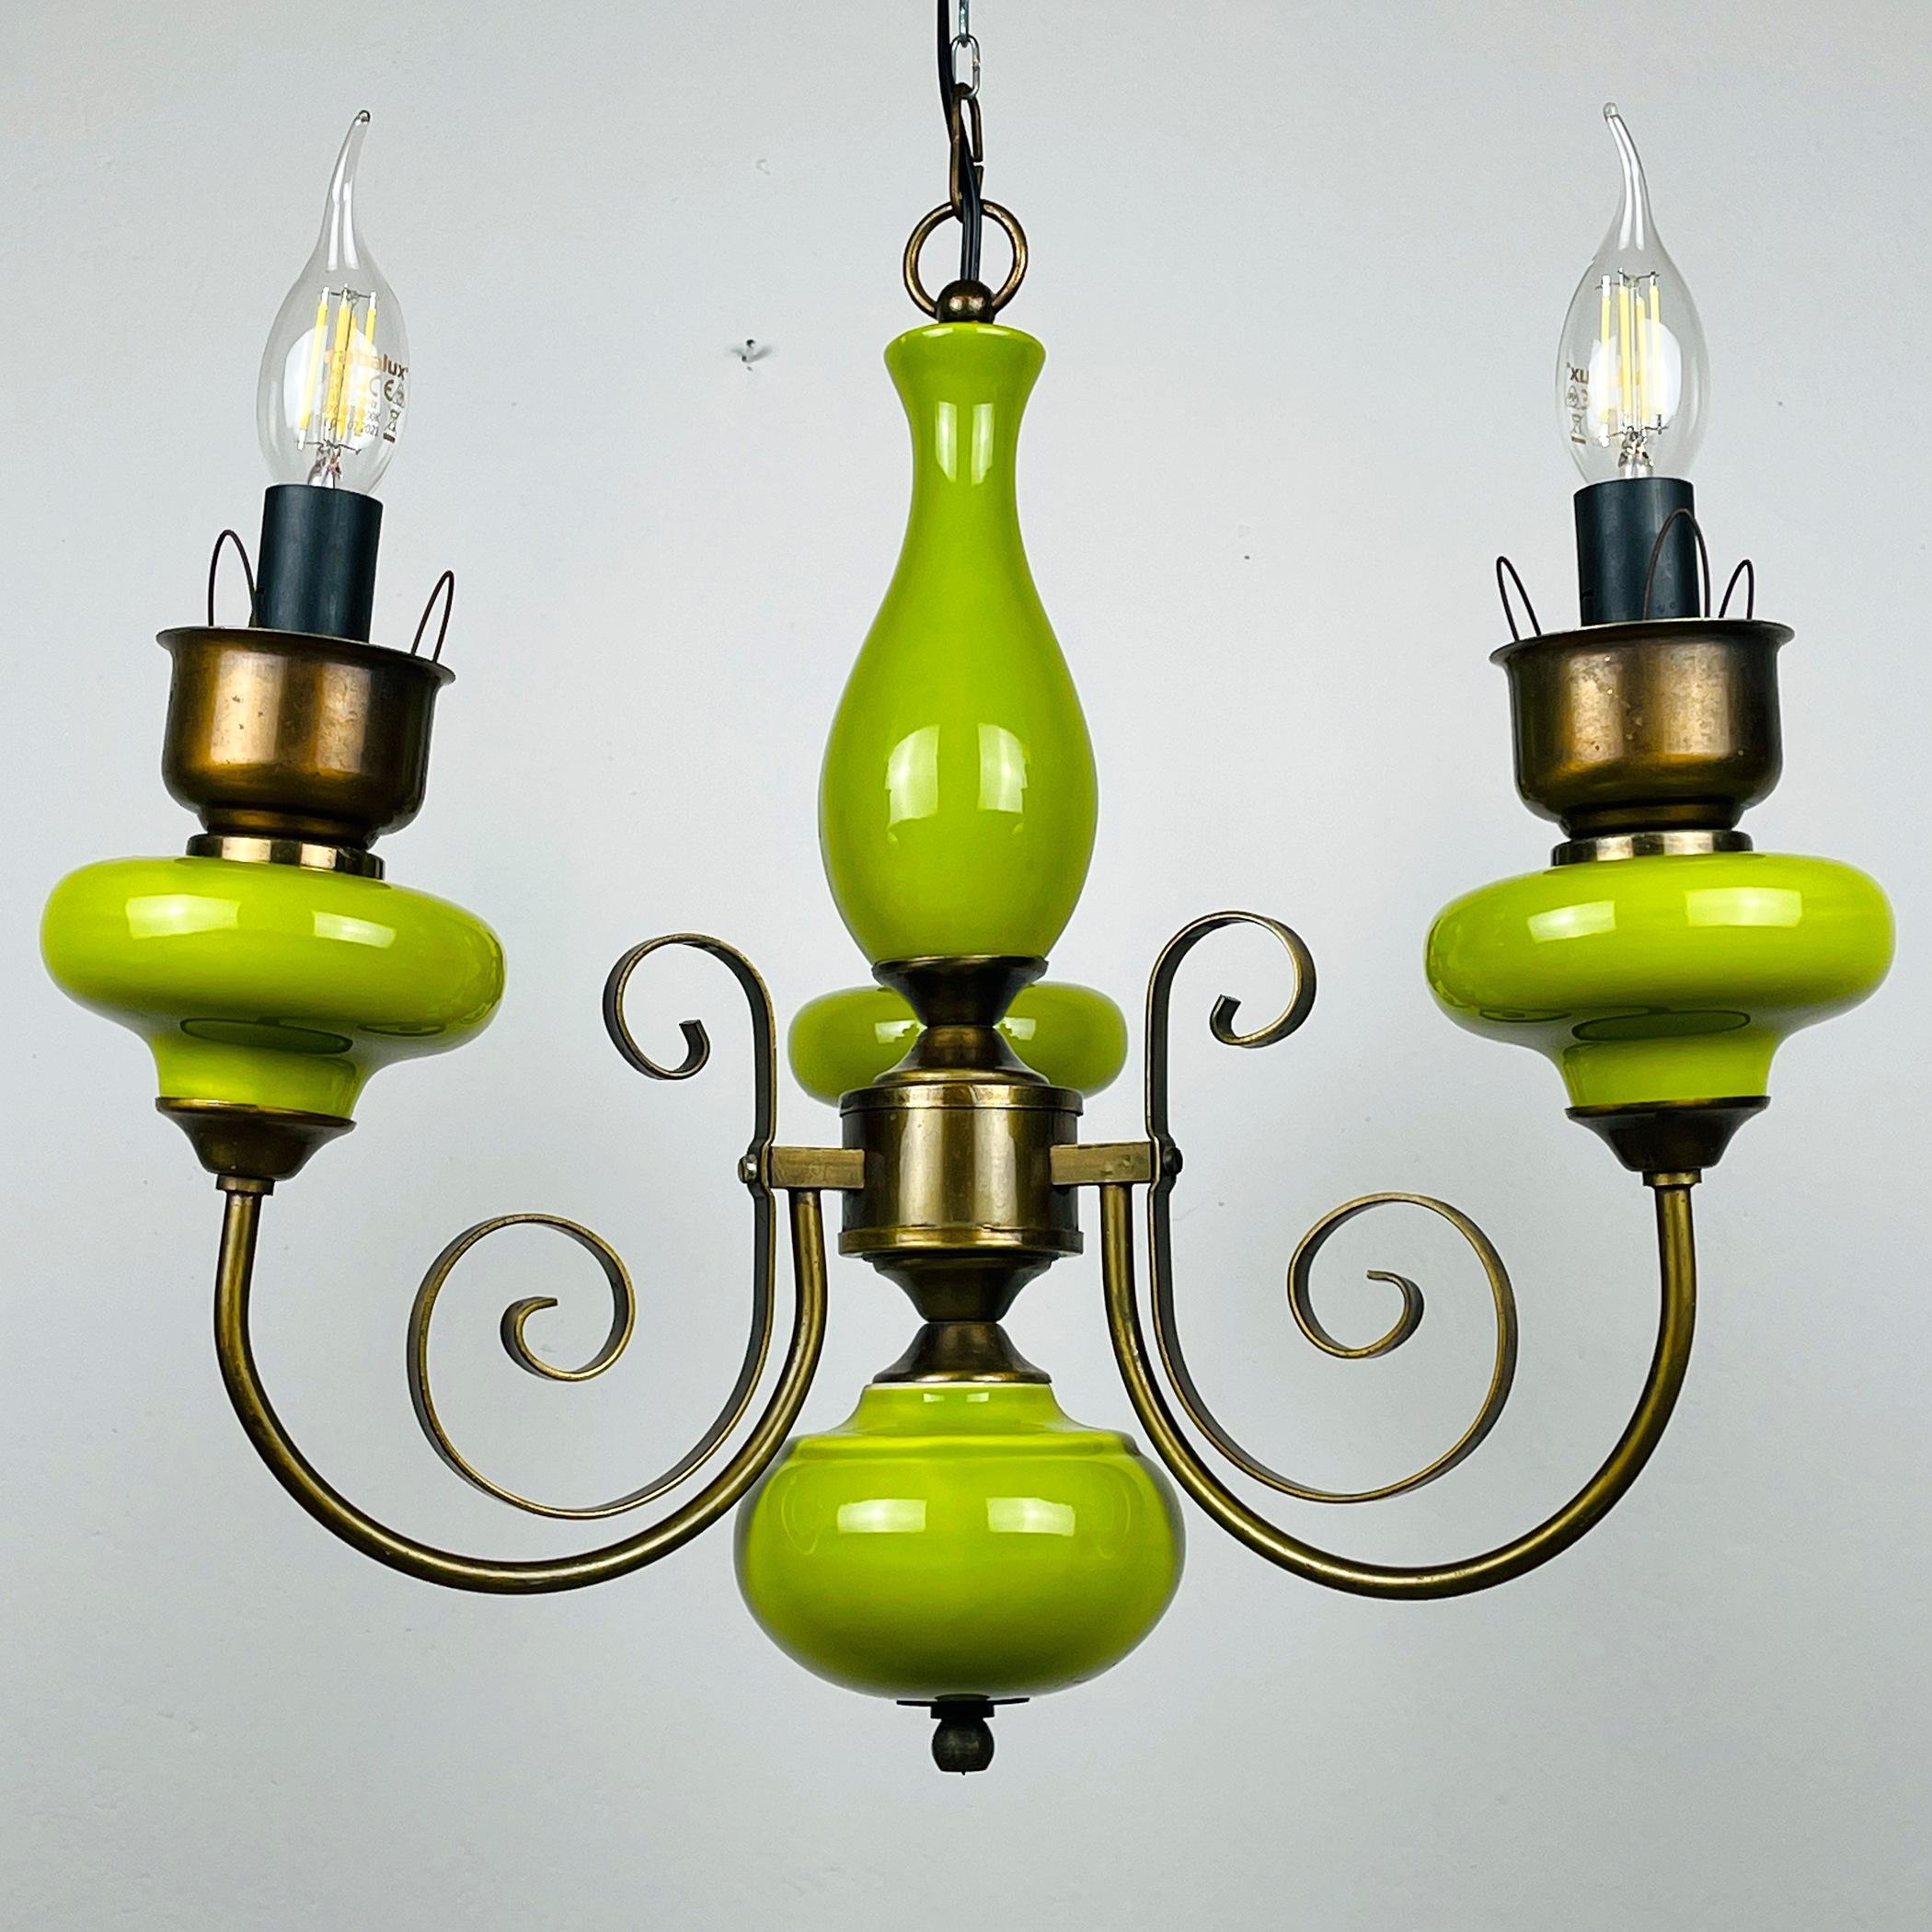 Illuminate your space with timeless charm through this exquisite vintage green porcelain chandelier, lovingly crafted in Italy during the 1950s. This enchanting piece features 3 bronze arms adorned with delicate ceramic cups.
In excellent original